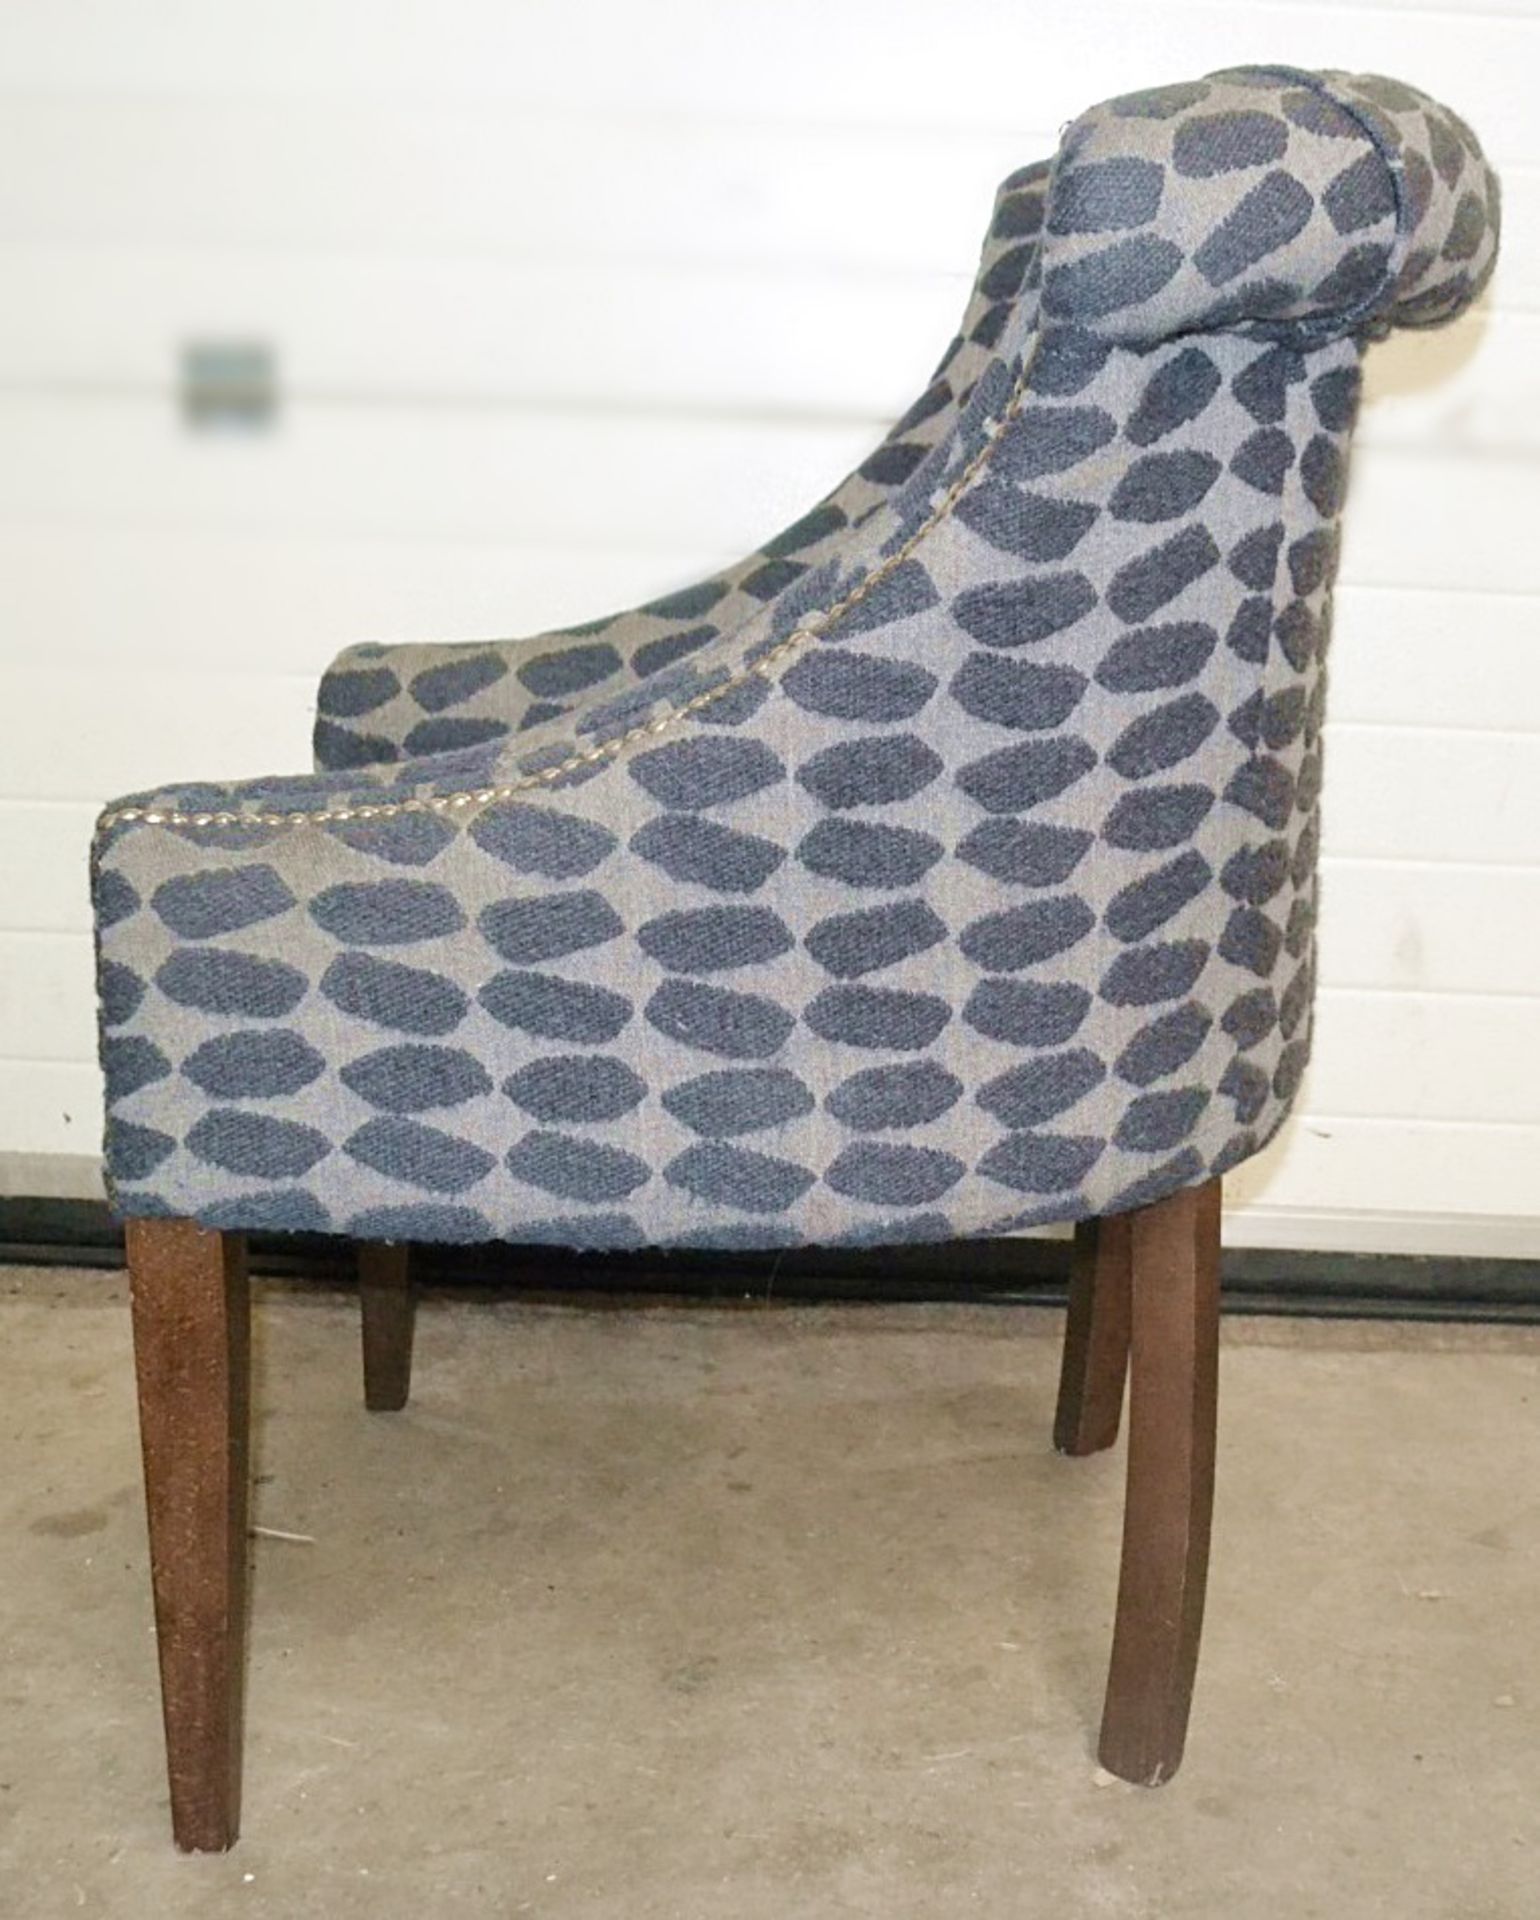 4 x Blue & Grey Upholstered Bar Chairs For Commercial Use - Dimensions (cm): W70 x D60, Back - Image 3 of 6